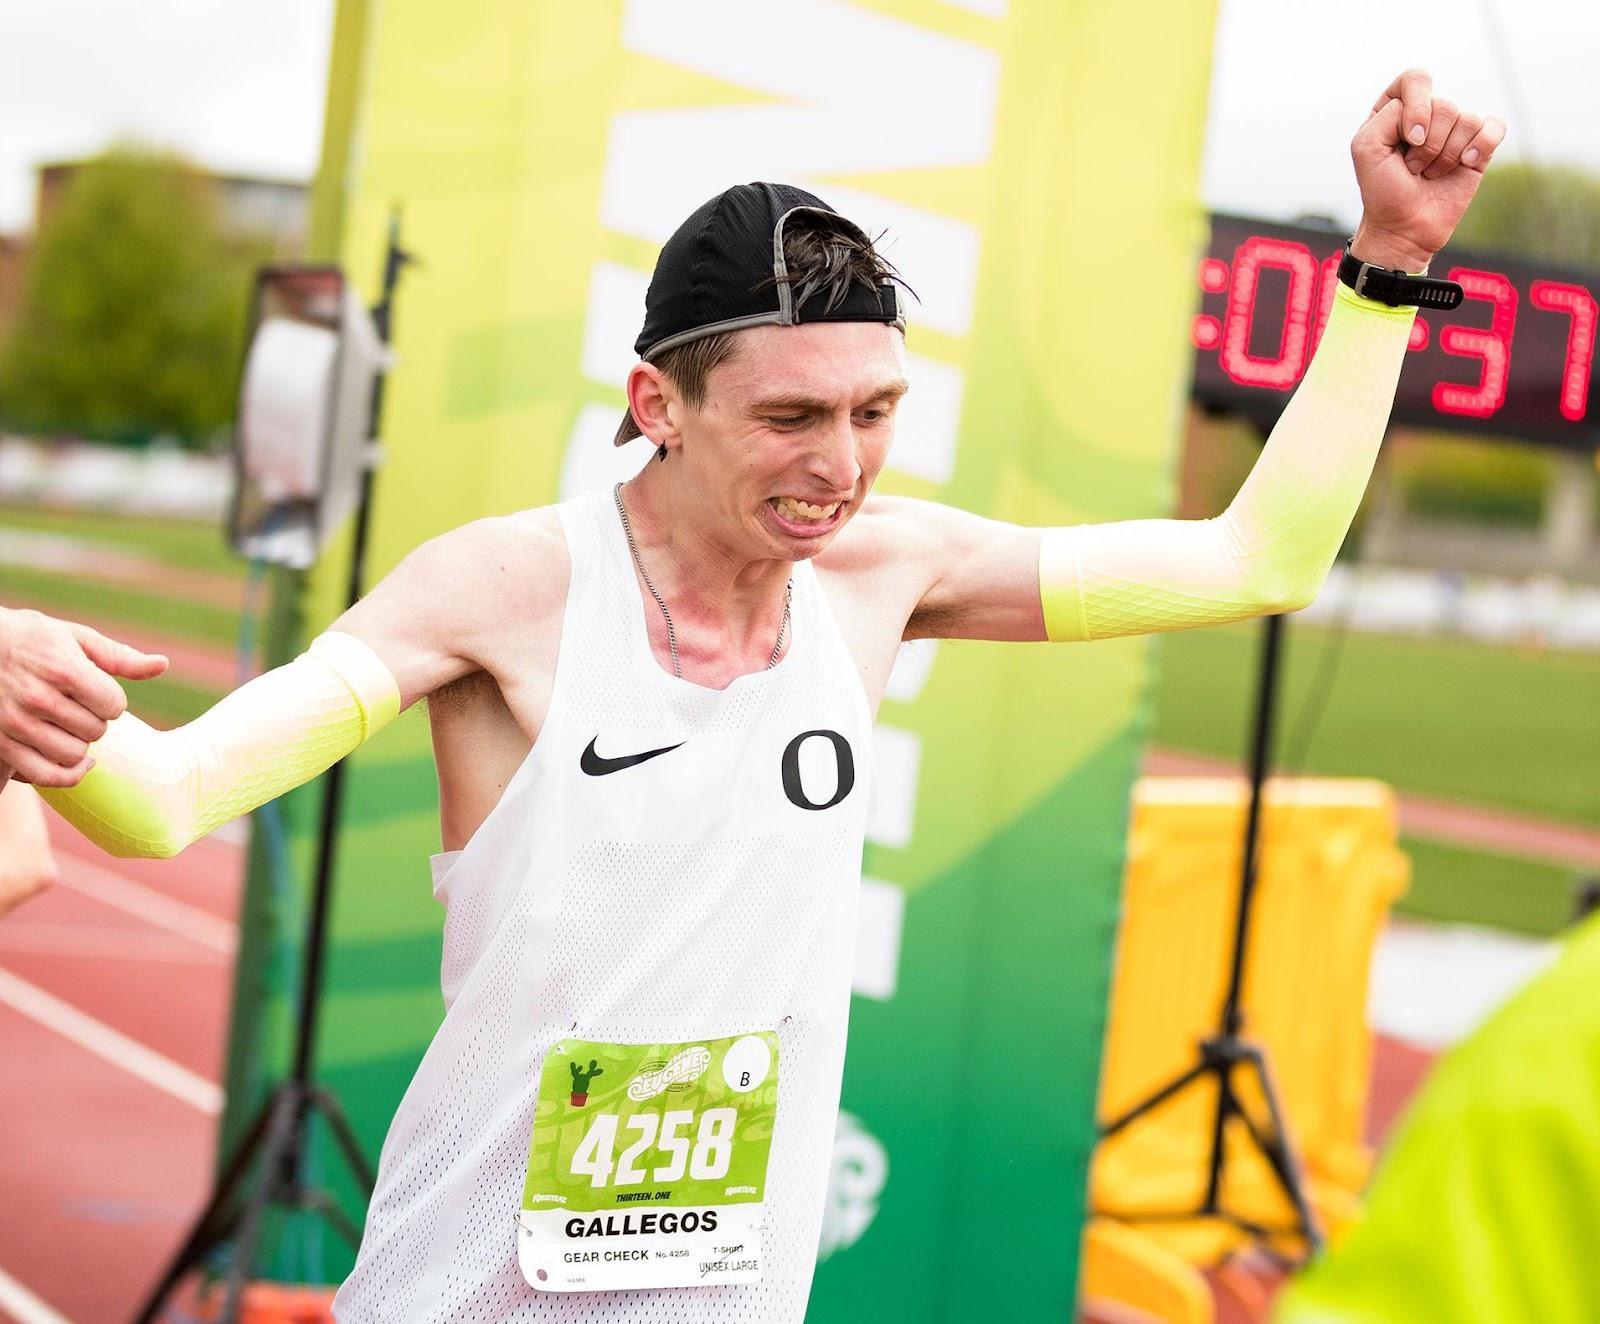 Nike signed Justin Gallegos, the first professional athlete with cerebral palsy.